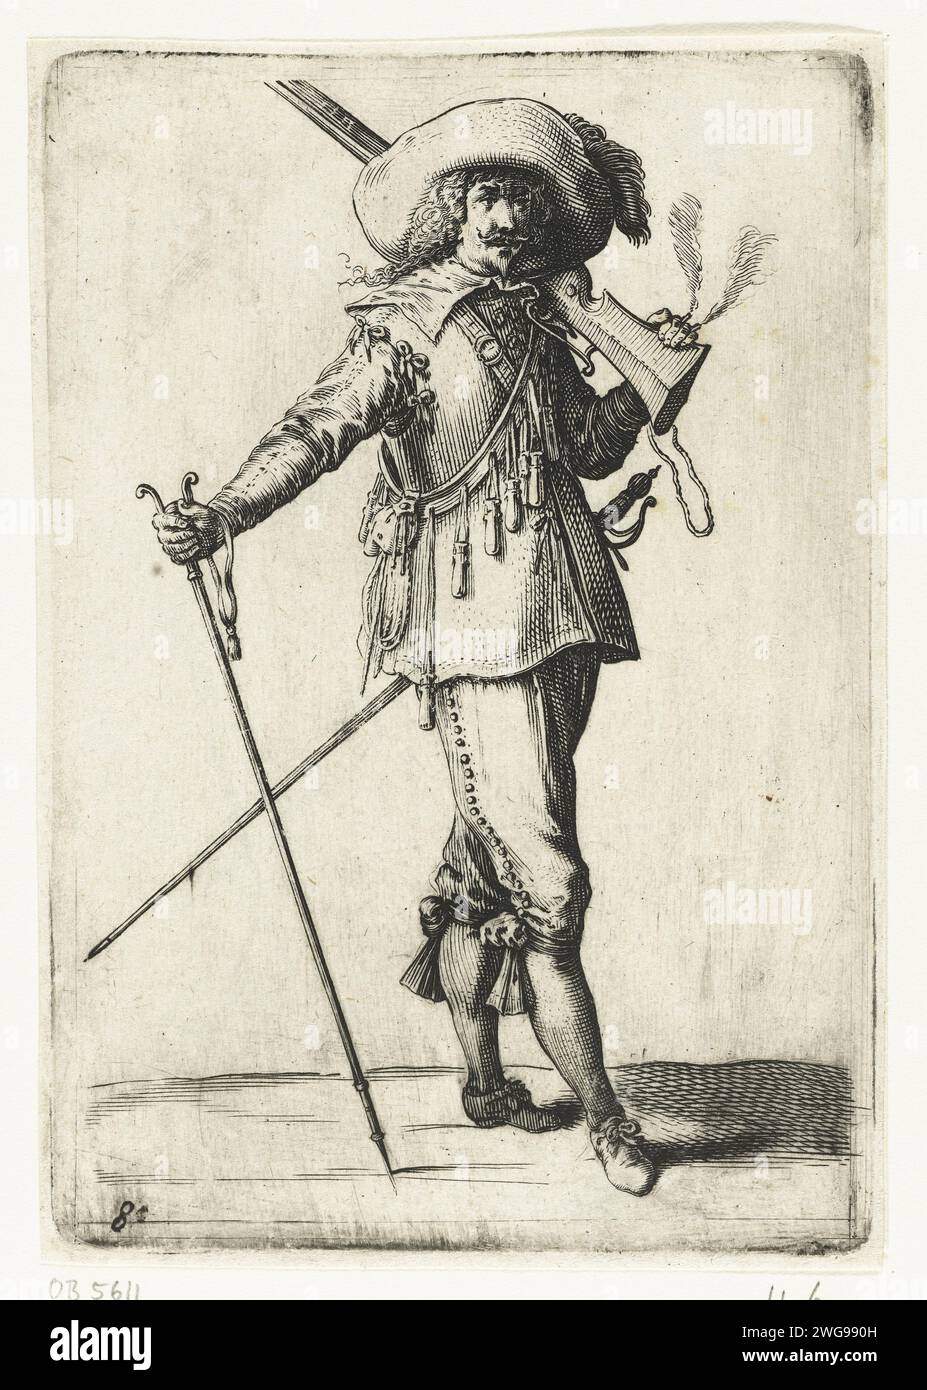 Standing soldier with musket over the shoulder and gun holder in the right hand, Salomon Savery, after Pieter Jansz Quast, 1630 - 1665  Standing soldier with musket over the shoulder and gunman in the right hand. Hat with wide weak edge on the head. The print is part of a ten-part series with performances of armed officers and soldiers, dressed according to Dutch fashion ca. 1625-1635. Amsterdam paper engraving clothes, costume (+ men's clothes). head-gear: hat (+ men's clothes). clothing for the upper part of the body (DOUBLET) (+ men's clothes). trousers, breeches (+ men's clothes). stocking Stock Photo